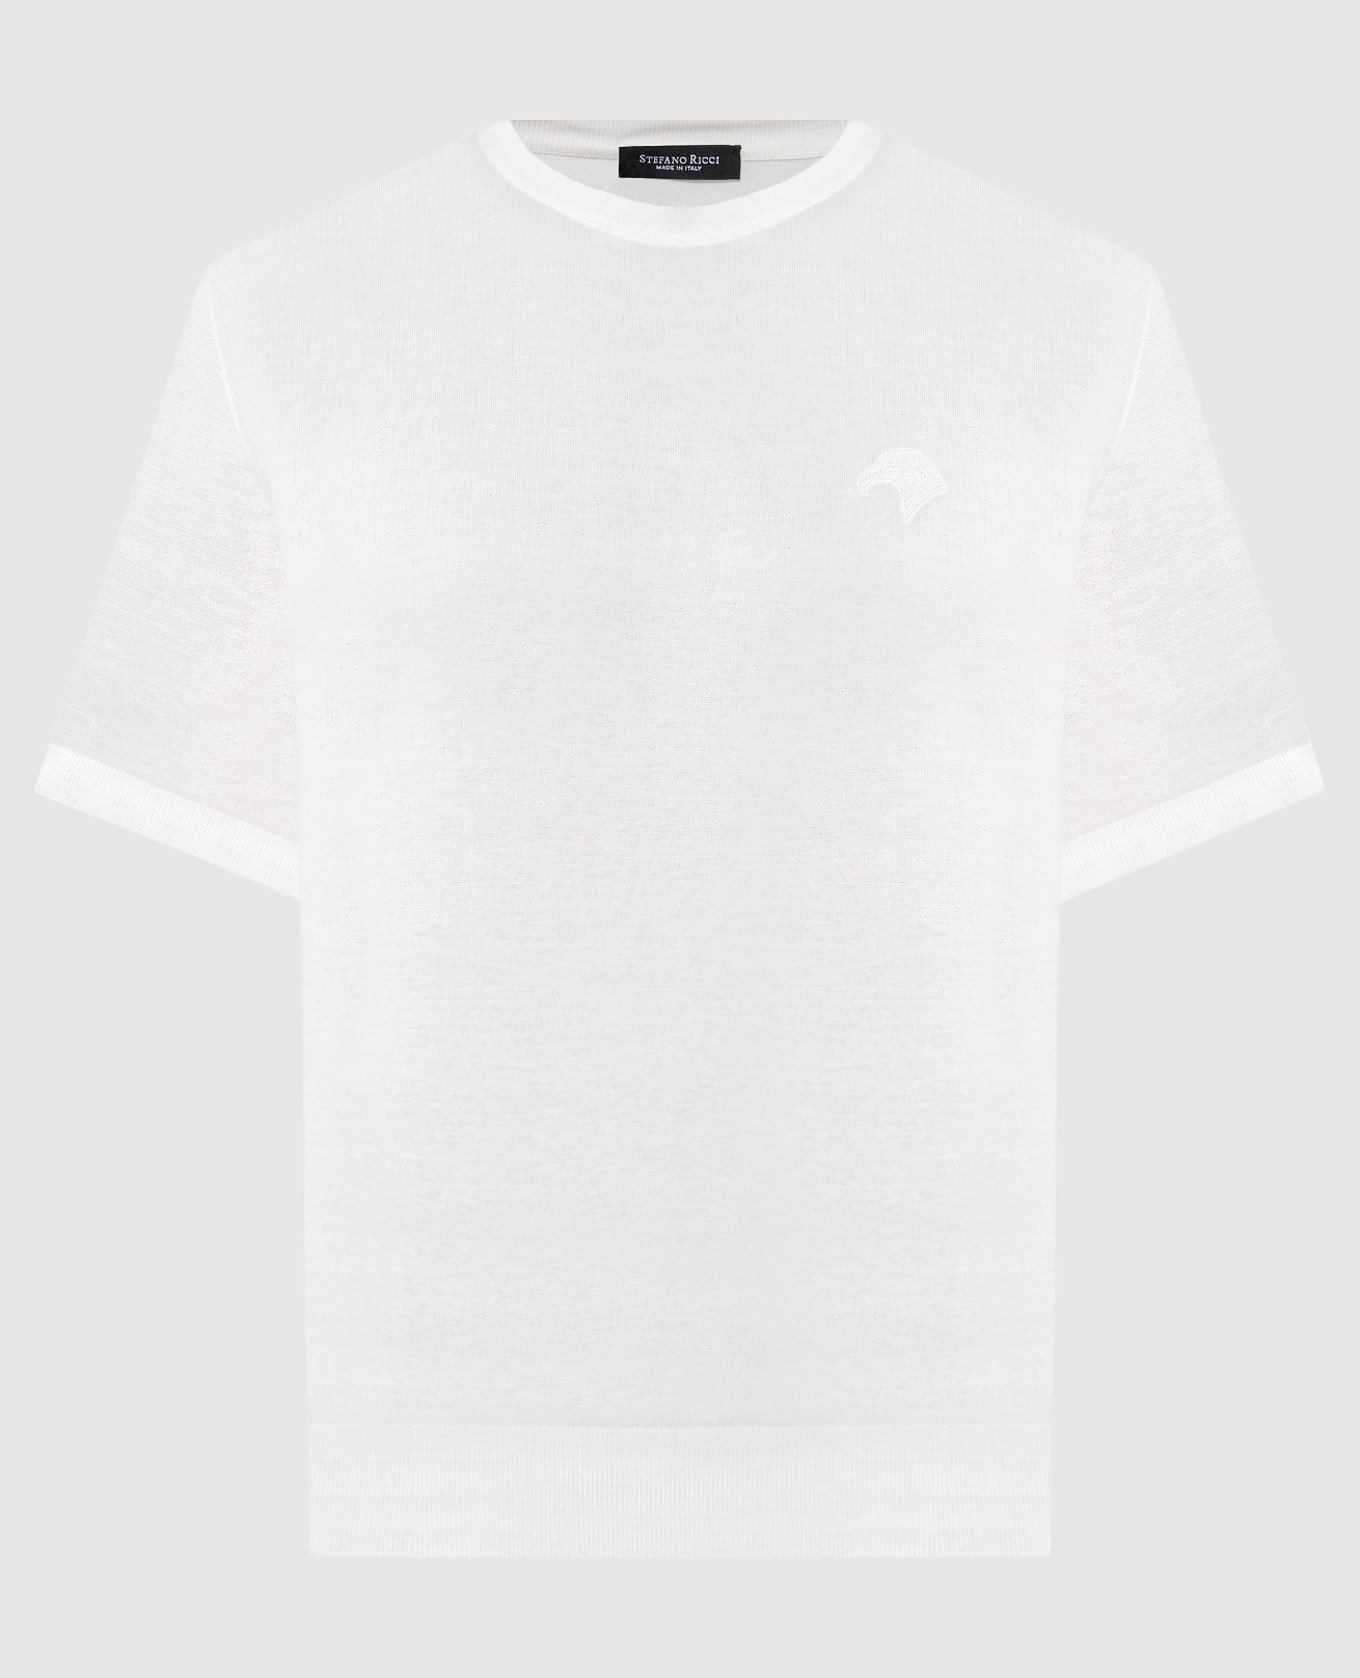 White t-shirt with embroidered logo emblem